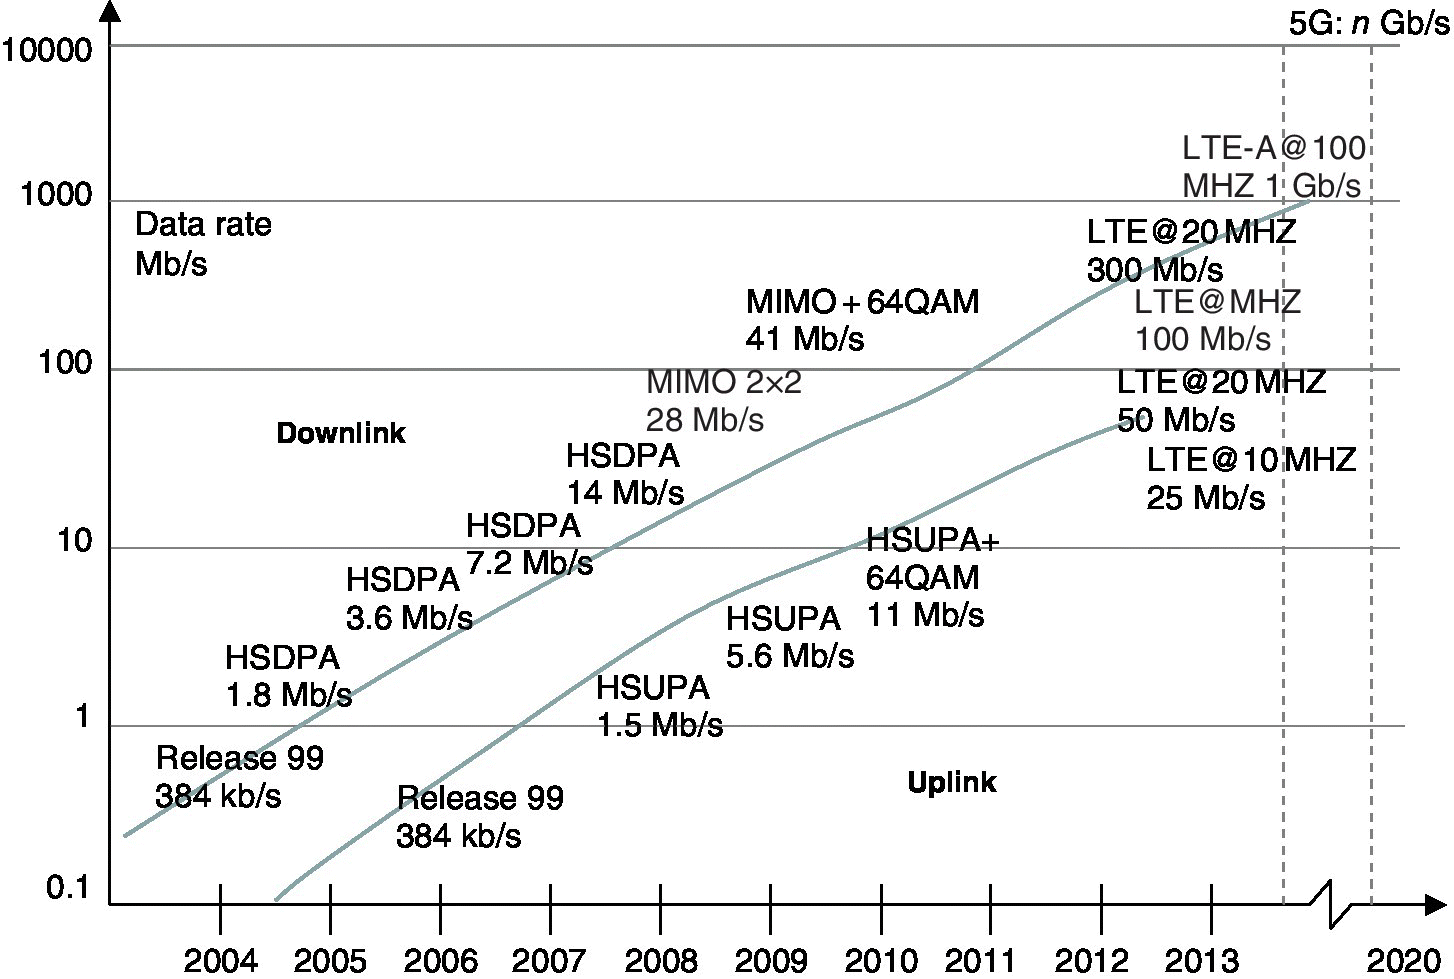 Schematic graph illustrating the upward trend from Release 99 at 384 kb/s to LTE-A at 100 MHZ 1 Gb/s of the overall mobile communications evolution and the LTE development towards the fully equipped LTE‐Advanced.